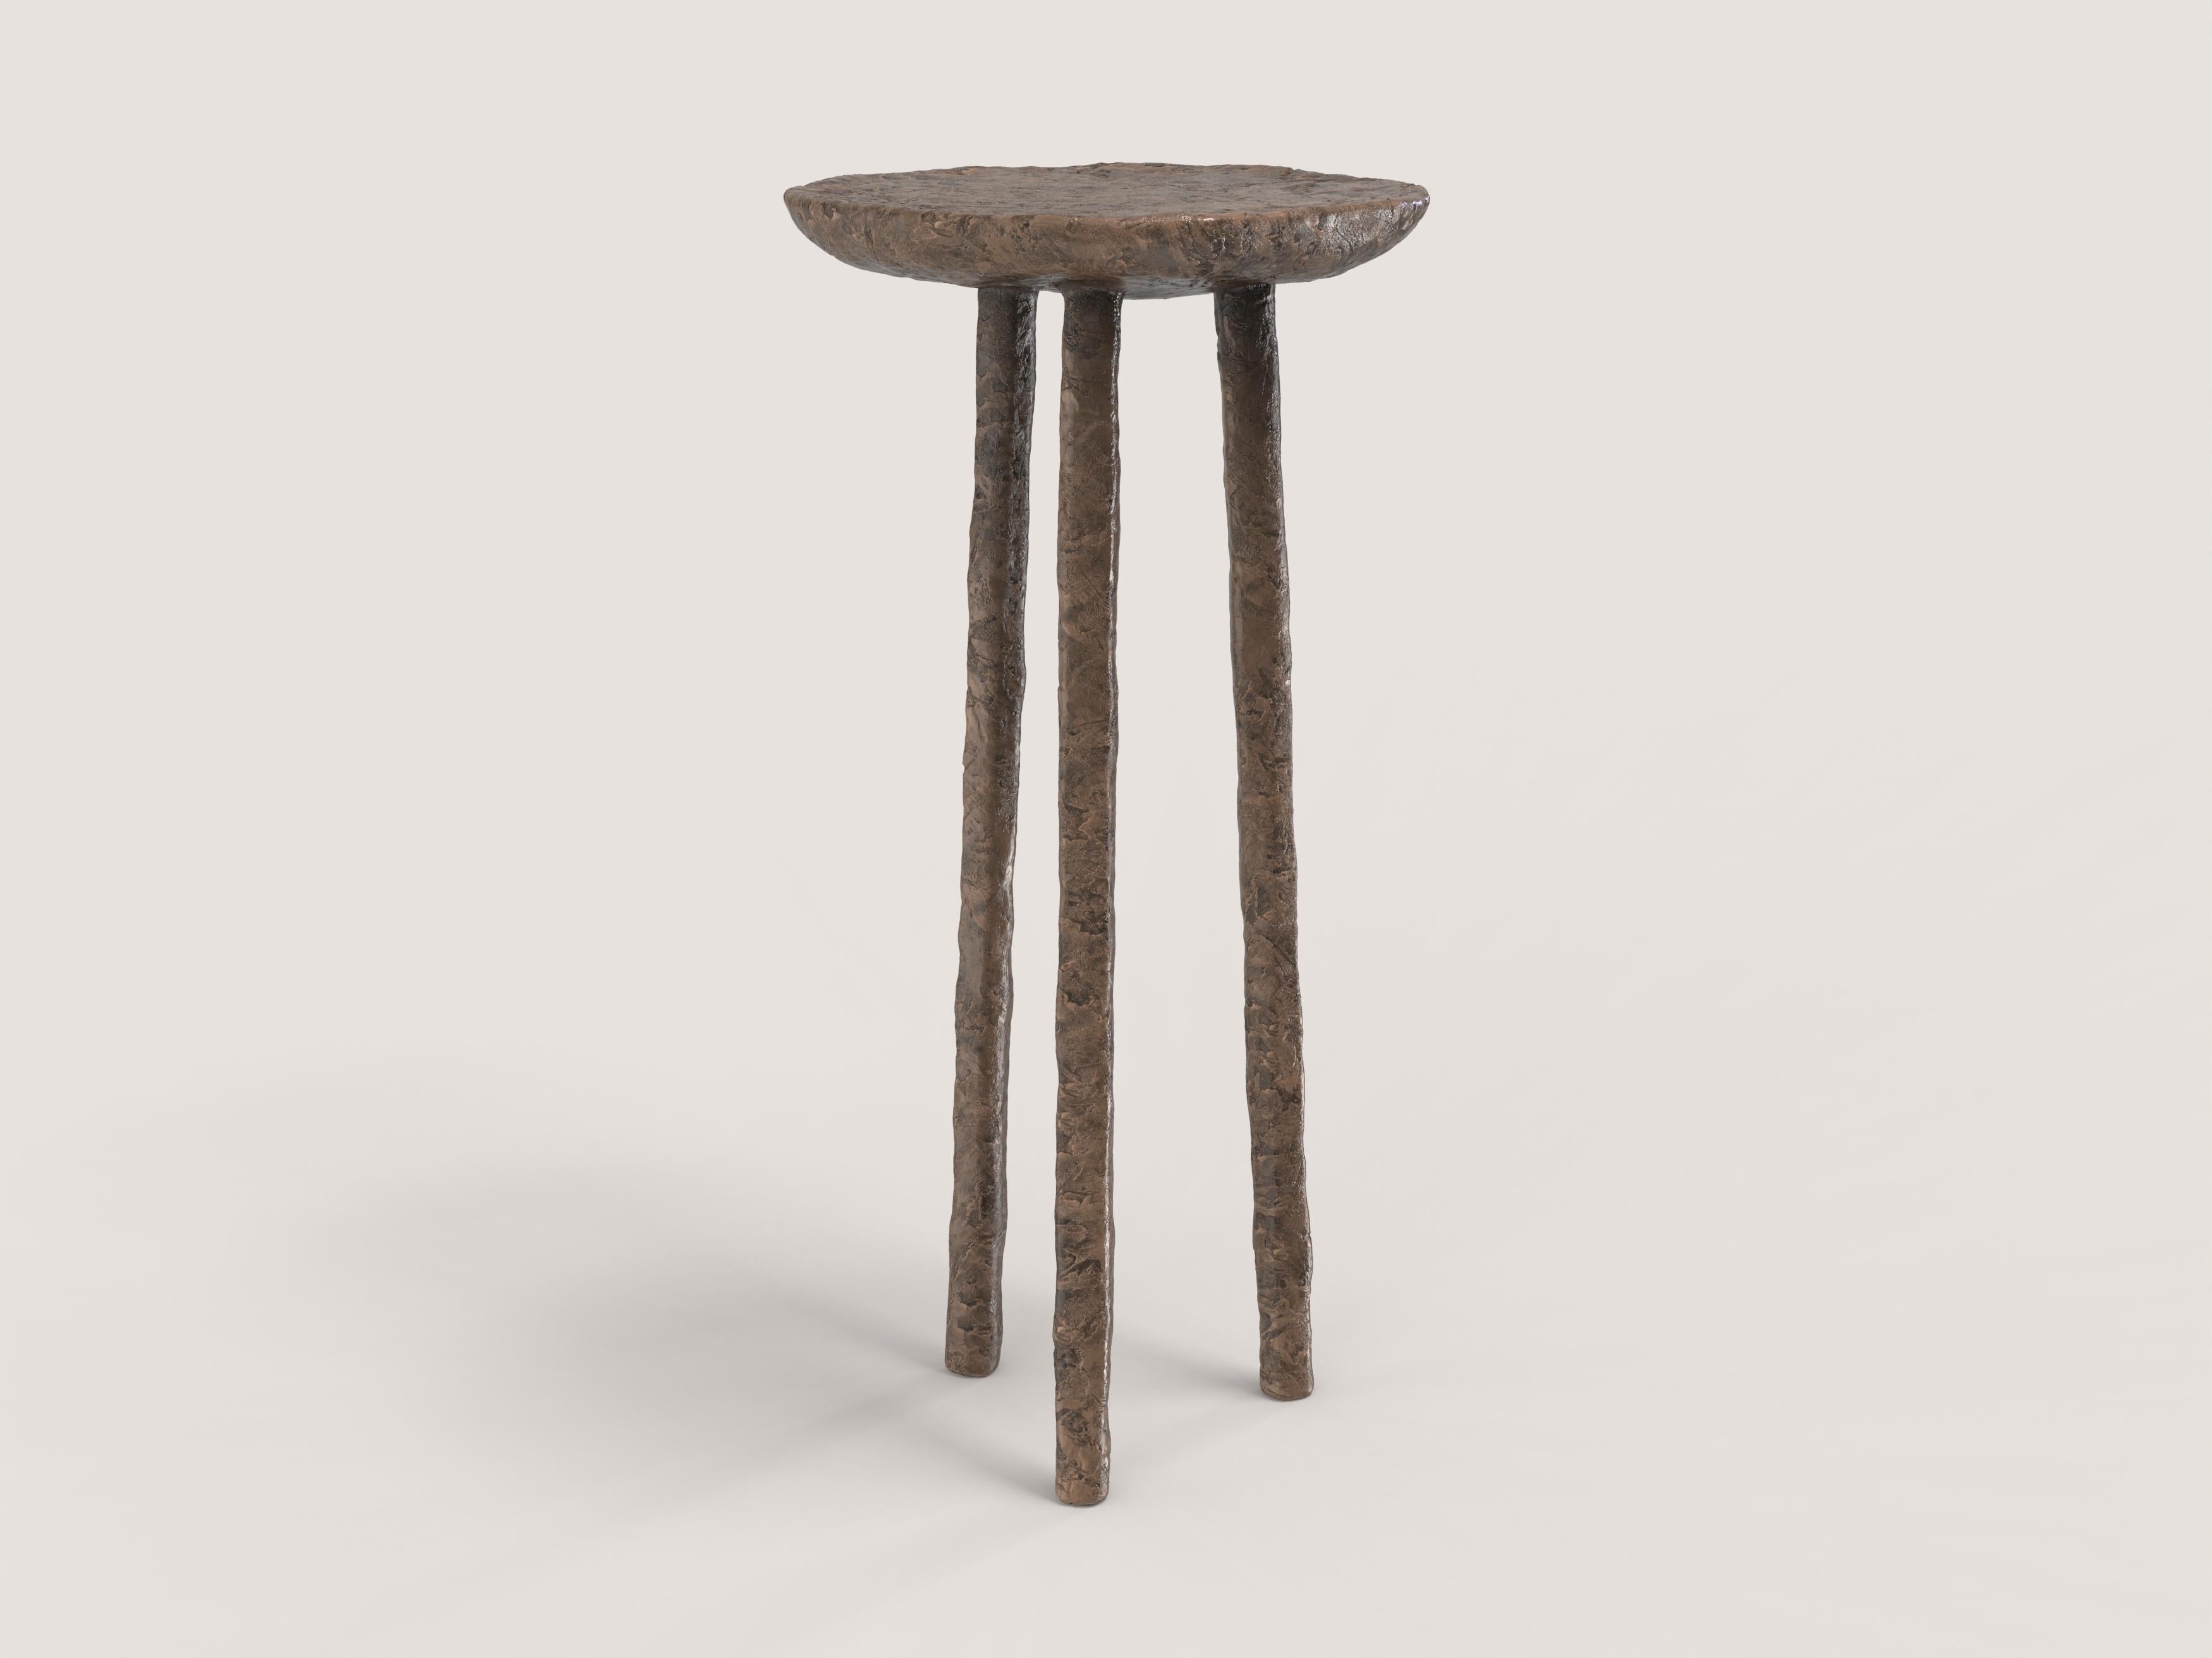 Comma V3 High Stool by Edizione Limitata
Limited edition of 150 pieces. Signed and numbered.
Dimensions: D 34 x W 34 x H 75 cm.
Materials: Cast bronze.

Comma is a 21st century collection of seatings made by Italian artisans in bronze with a green